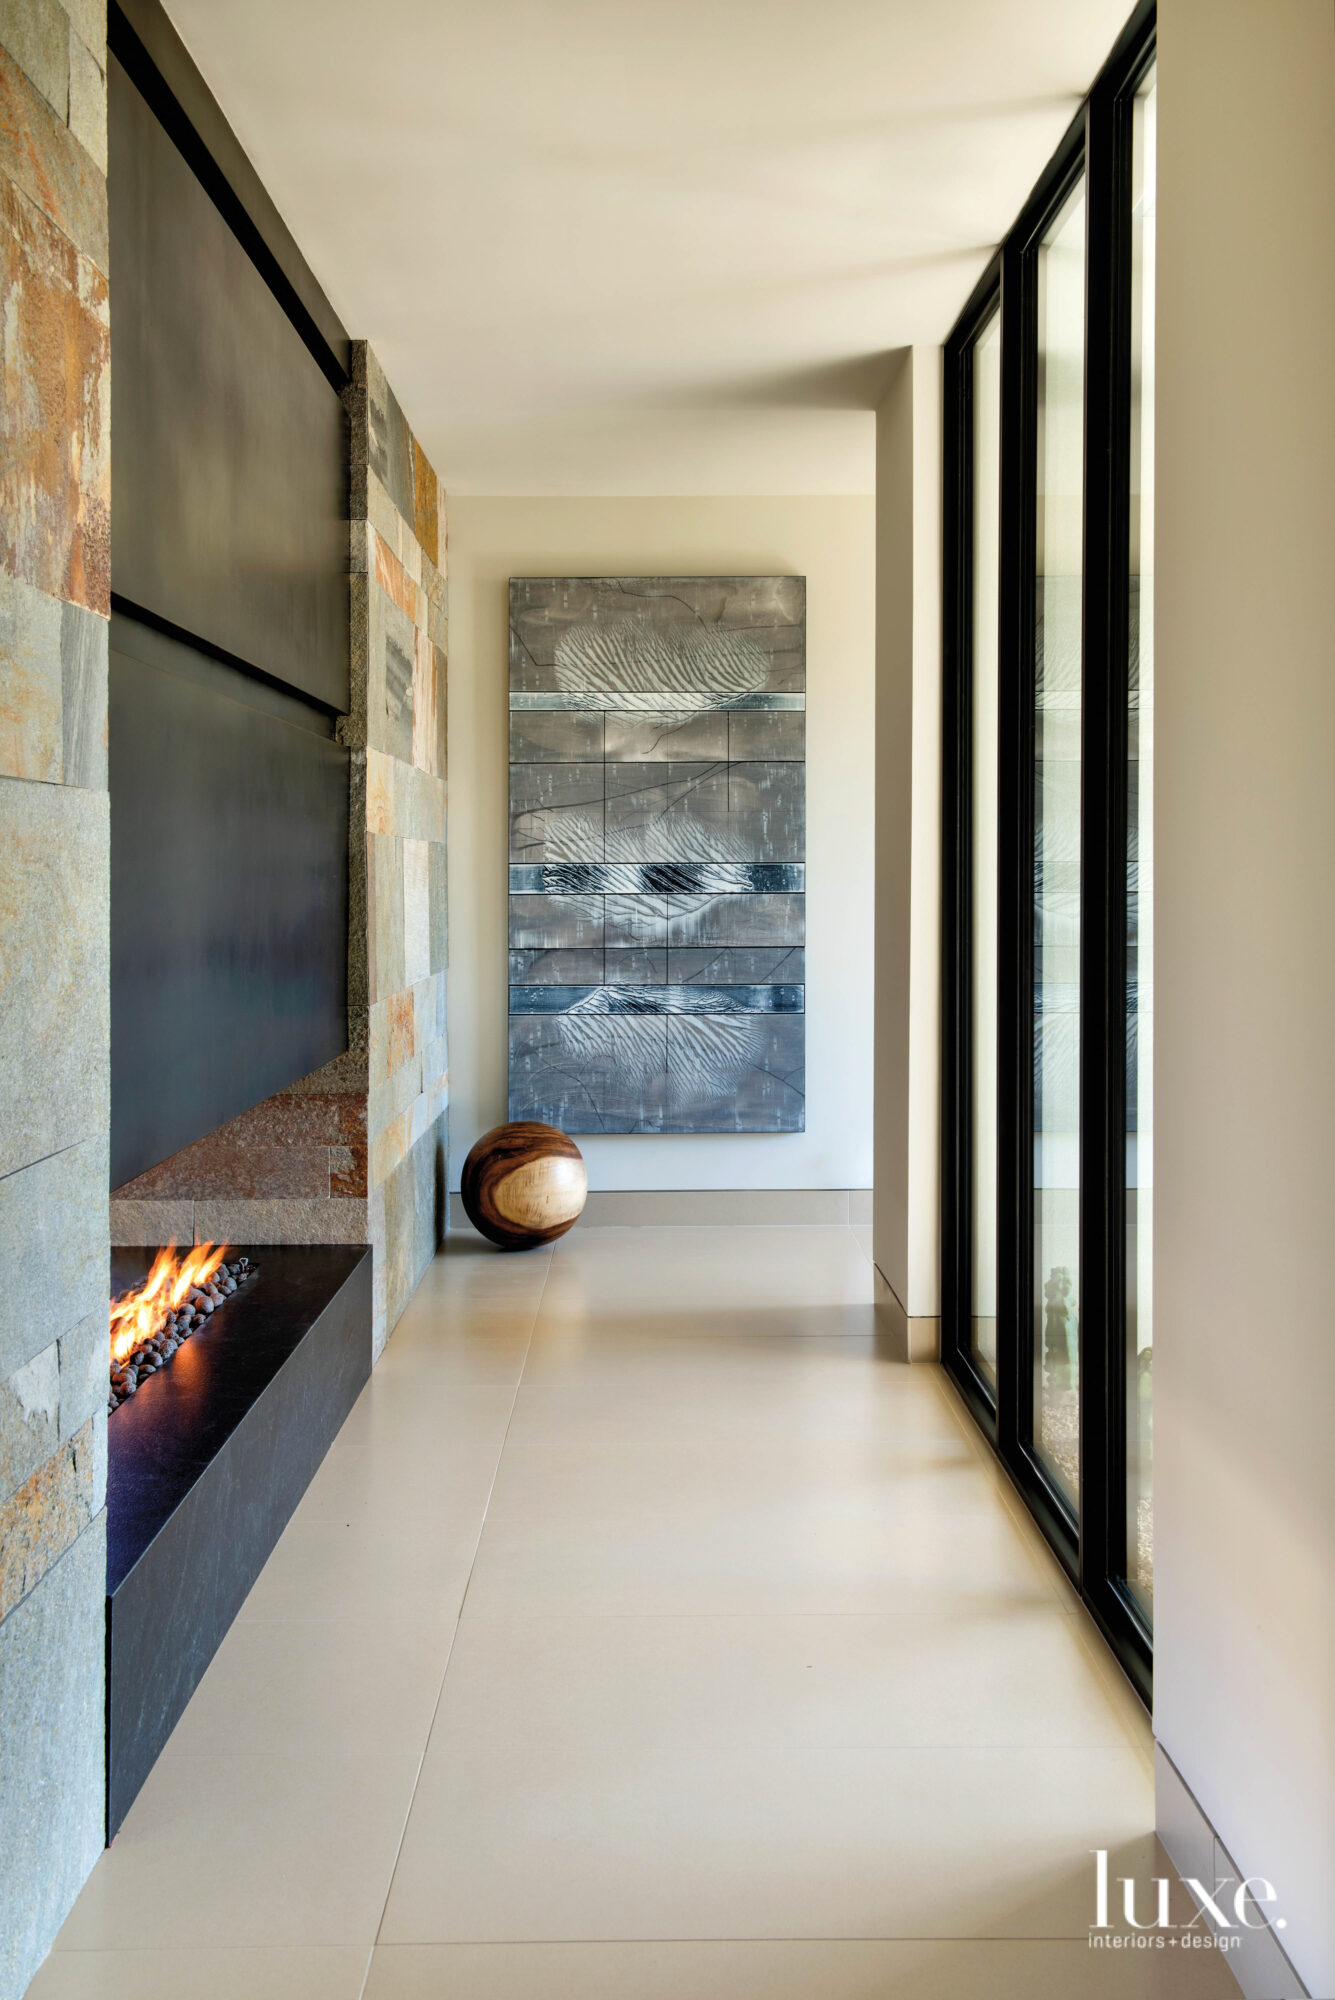 The hallway with a fireplace on the left and an abstract gray painting by Michael Kessler.